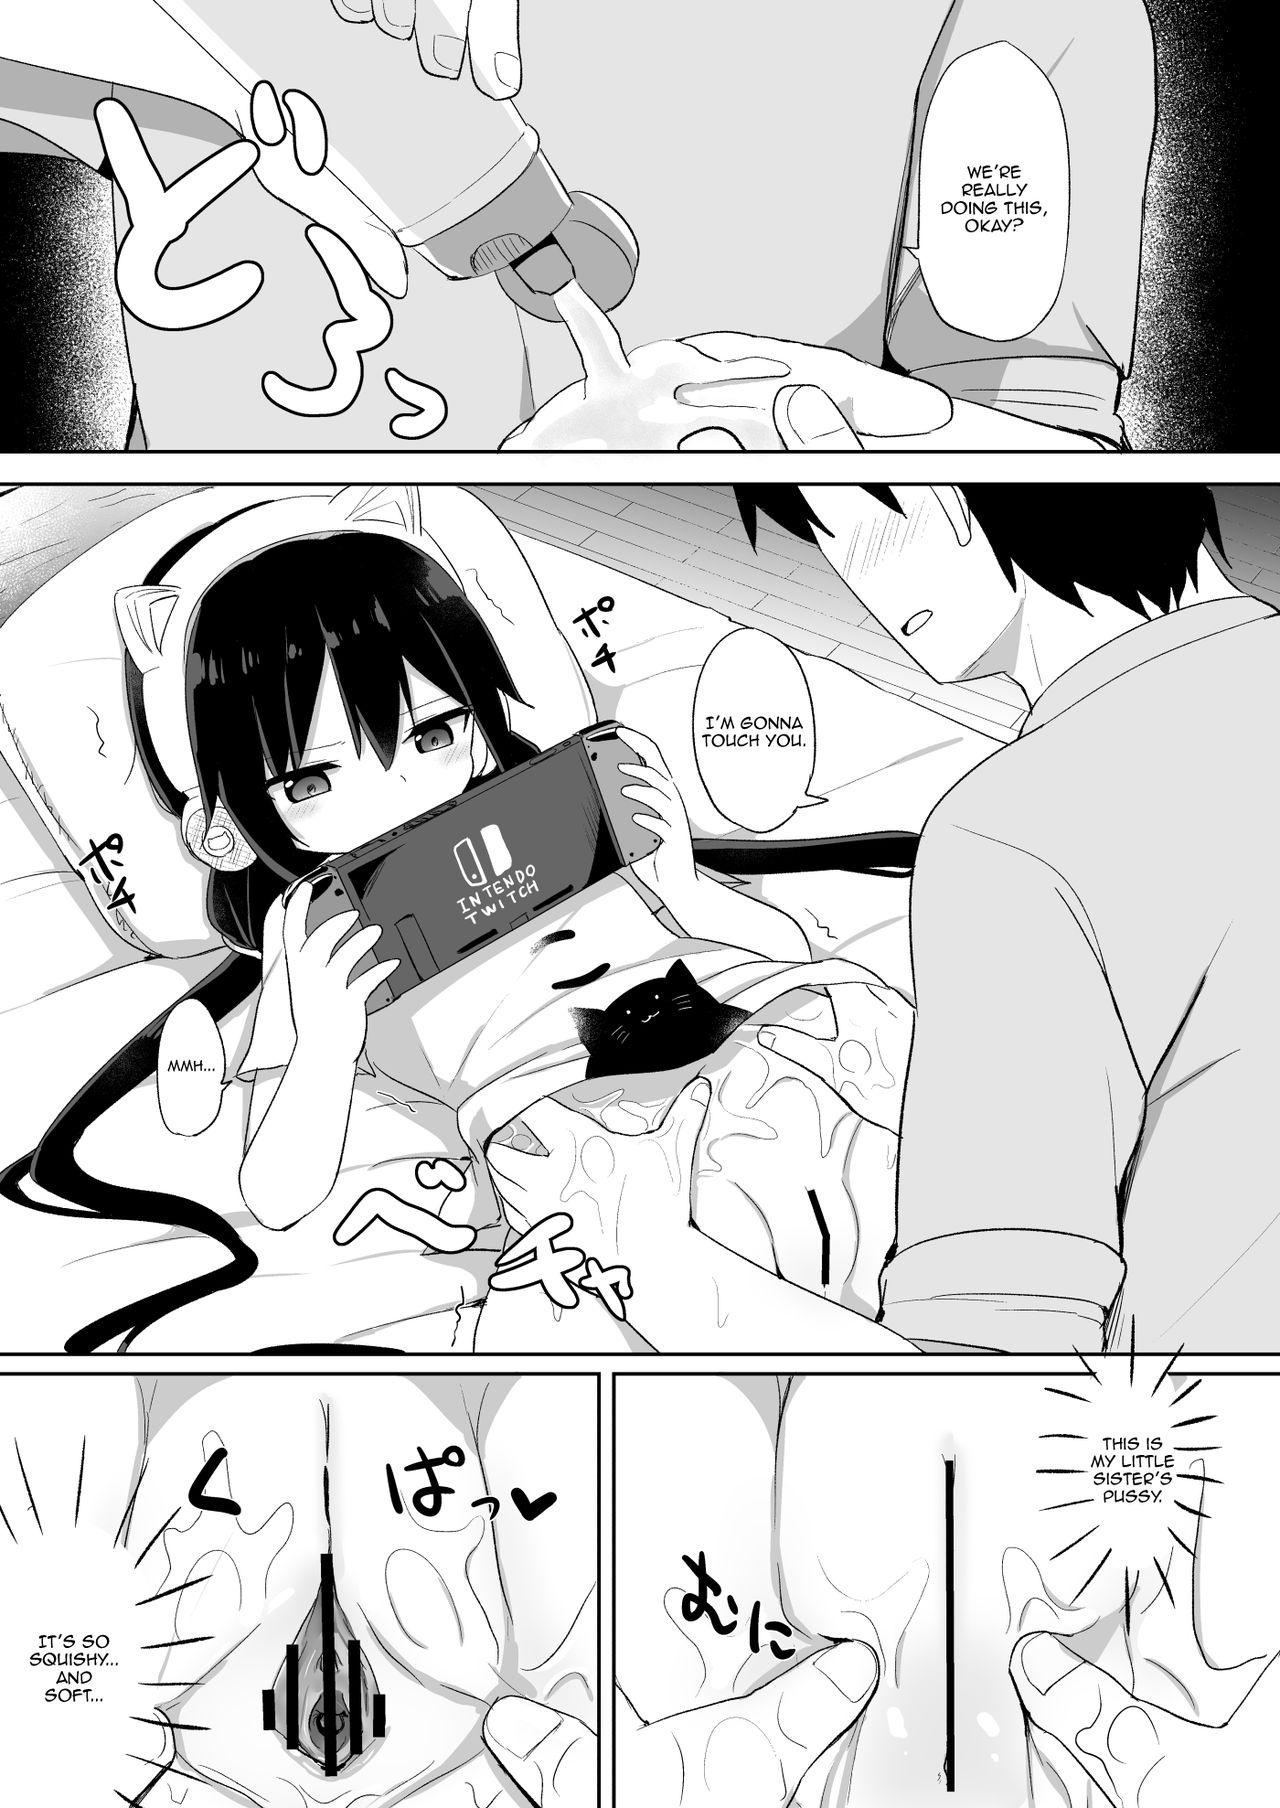 Downersan Sukisuki Imouto Succubus ni Naru made | From a Downer Gamer Little Brother♂ to a Little Sister♀ Succubus Who Loves Nii-san 9